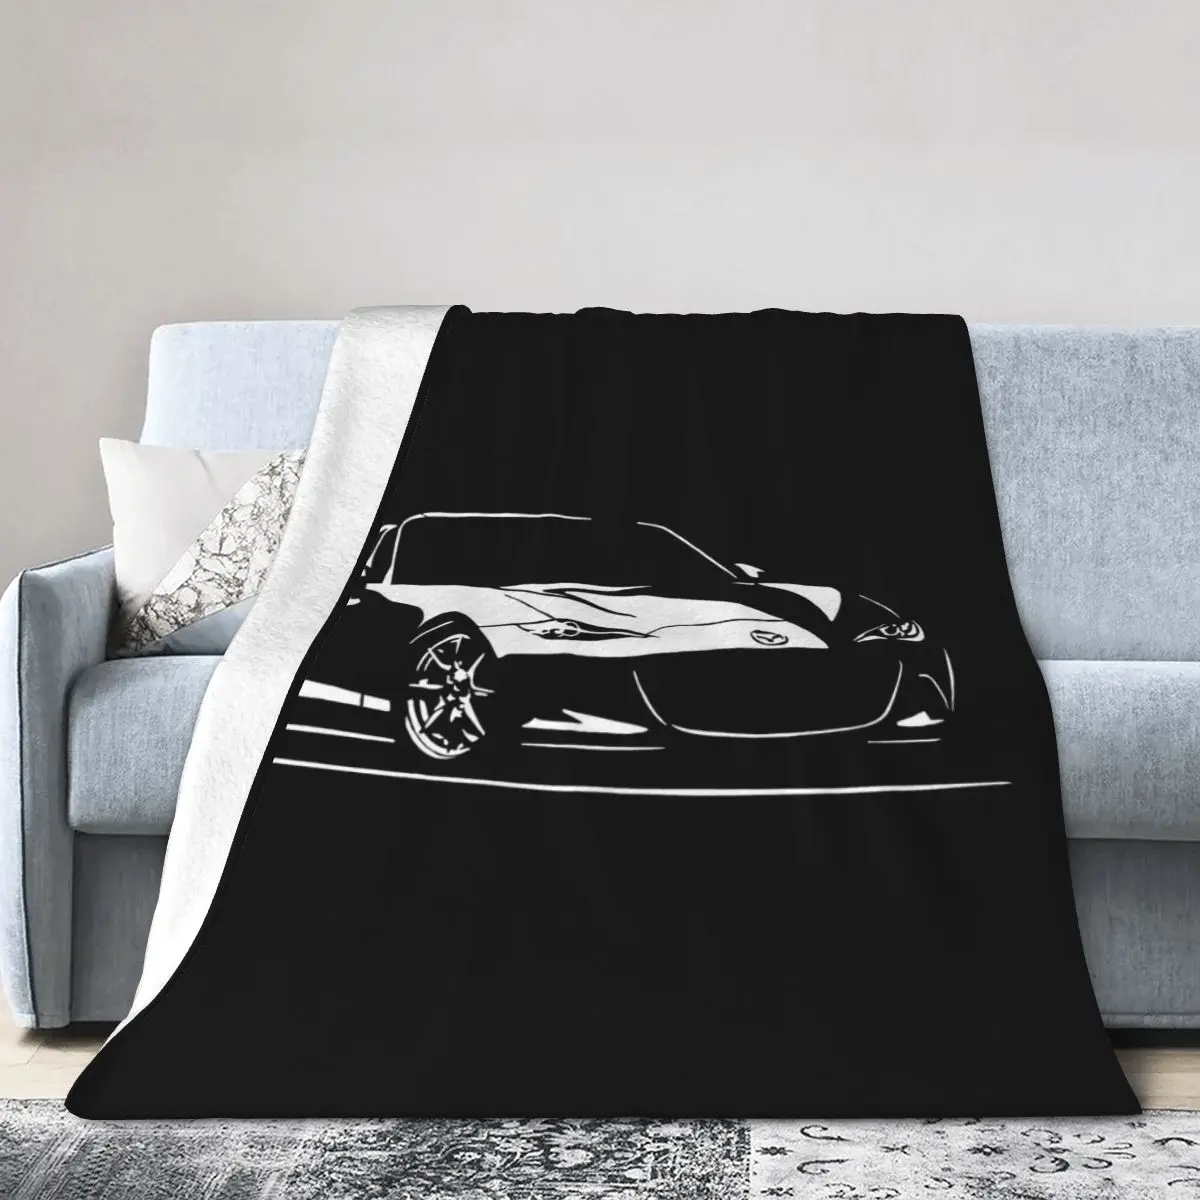 

For Mazda Miata Fans Brand New Bed Soft Comforter Double Bed Blanket Anti-pilling Microfibers Non-stick Washable Harajuku fluffy